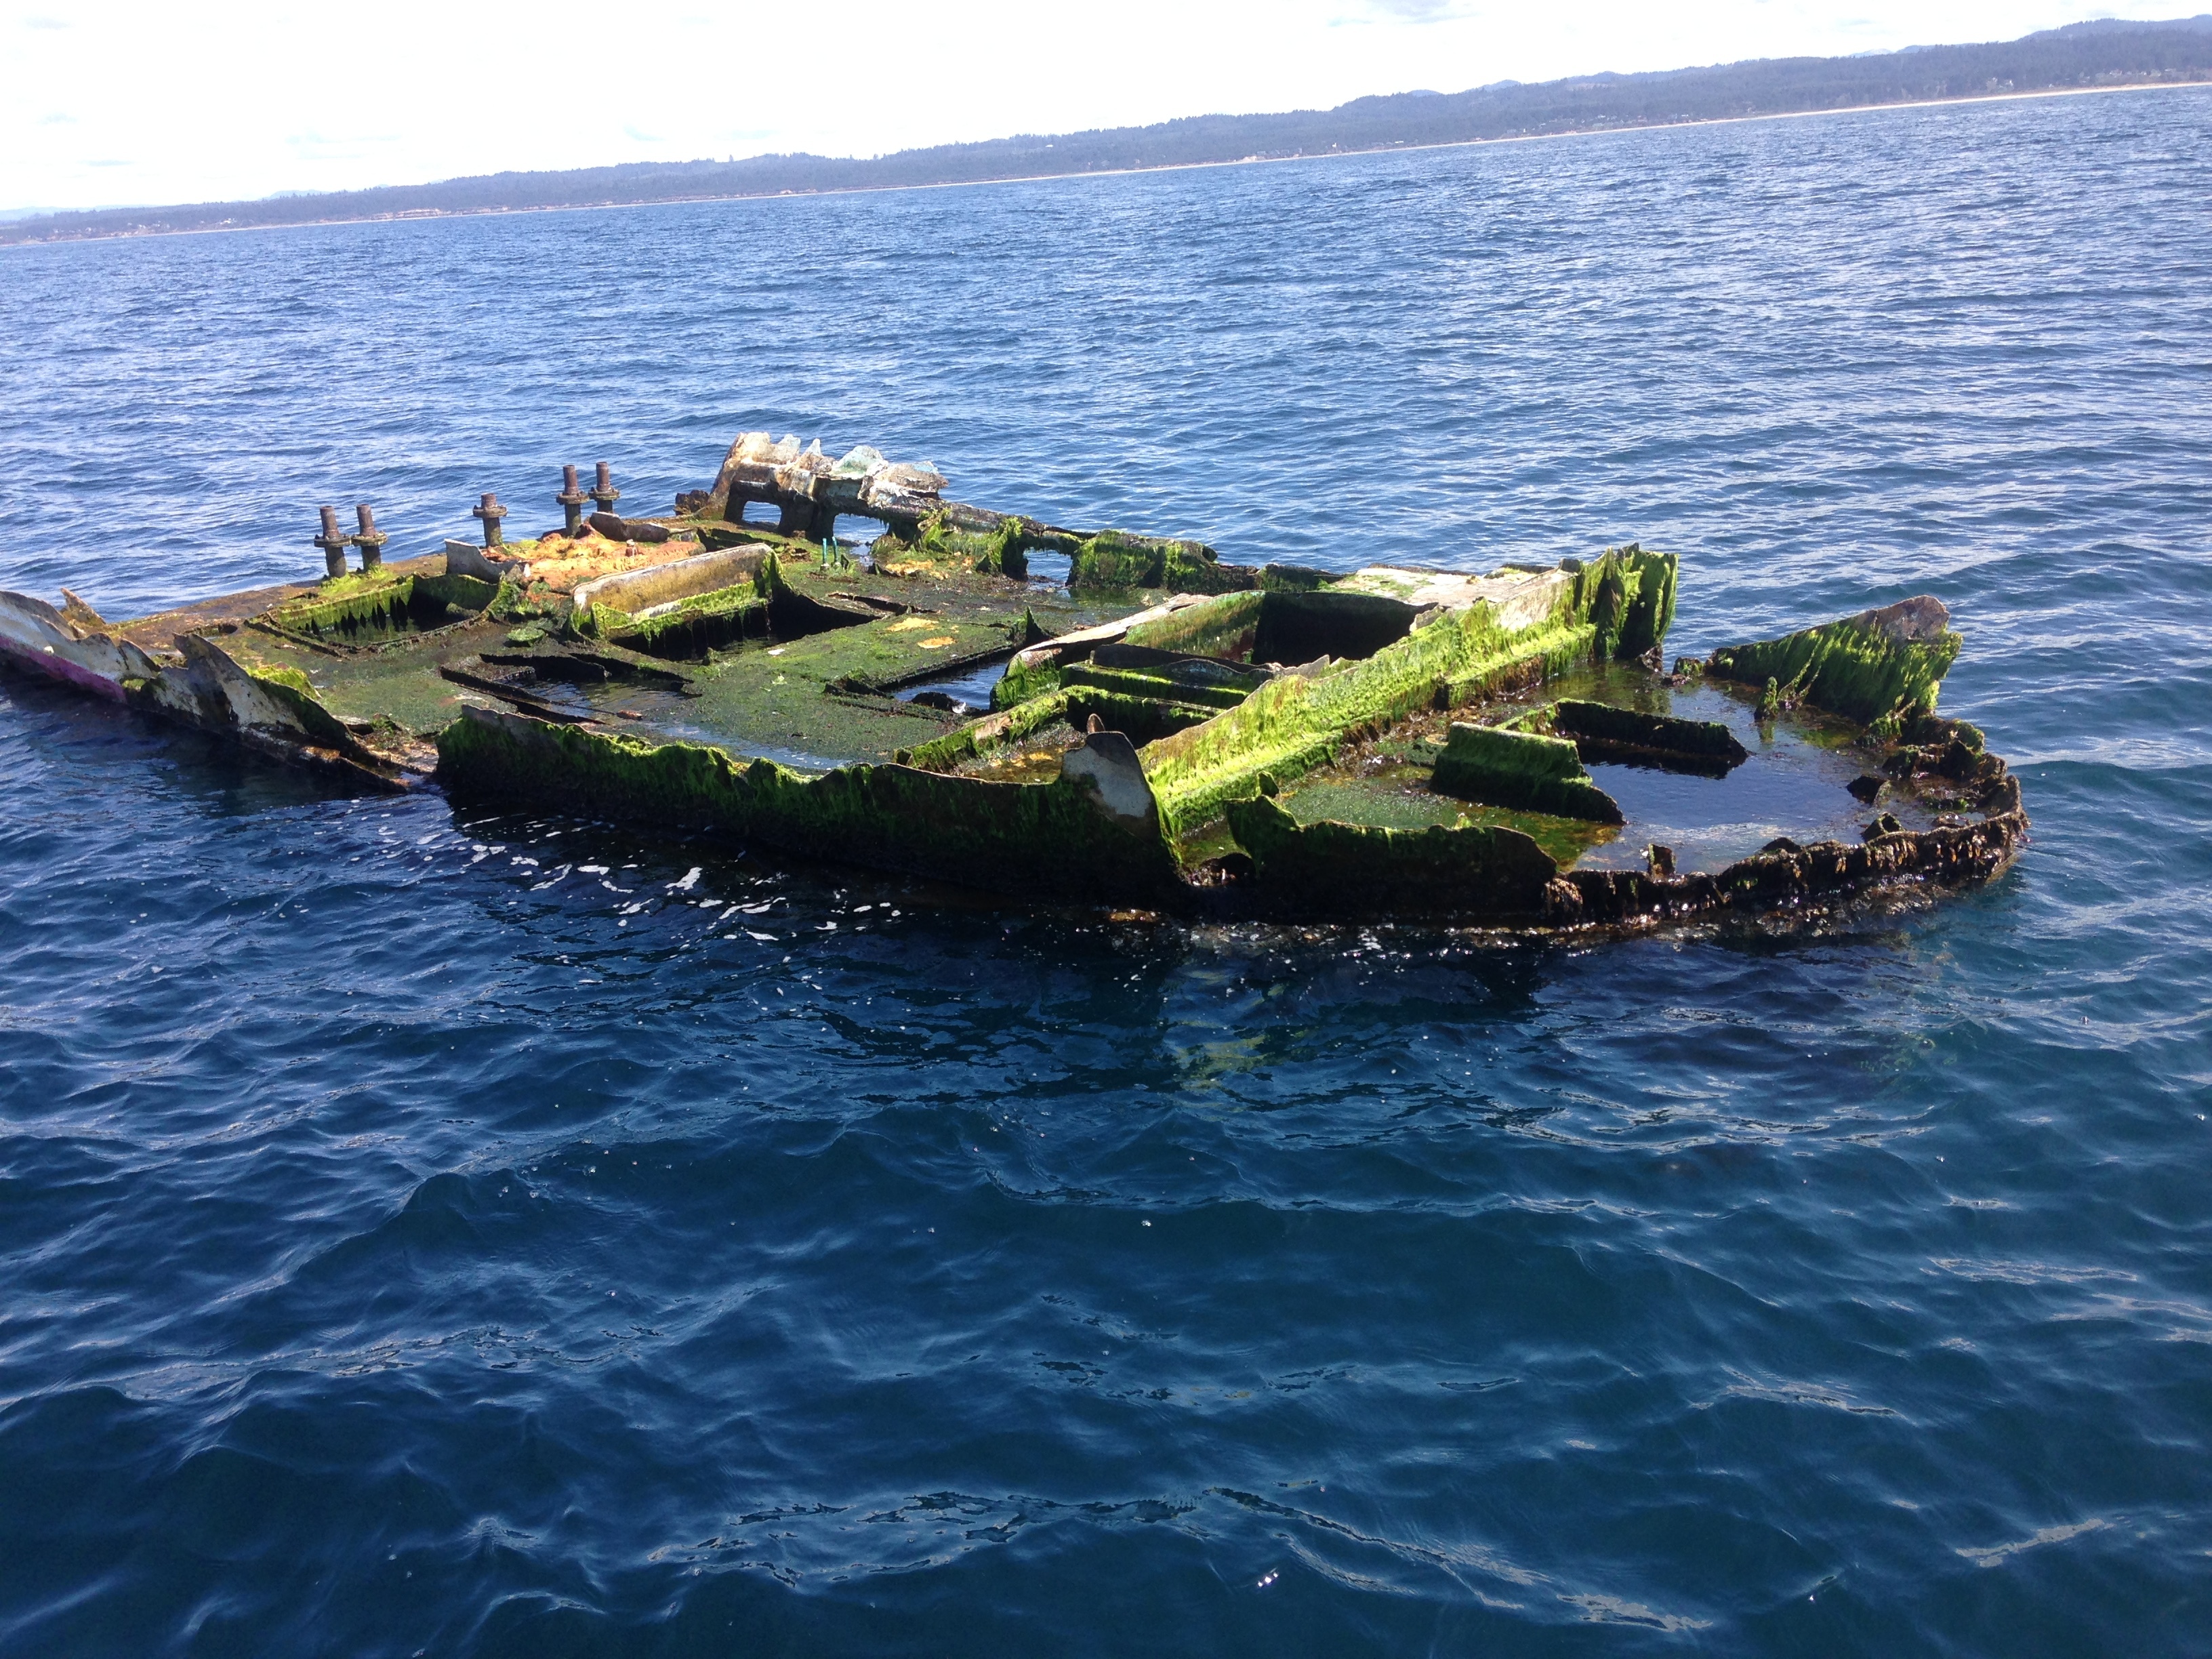 This is the Japanese boat wreckage that was recovered off of Newport, Oregon last April with a school of non-native fish inside its hull. (Photo courtesy of John Chapman, OSU-HMSC)